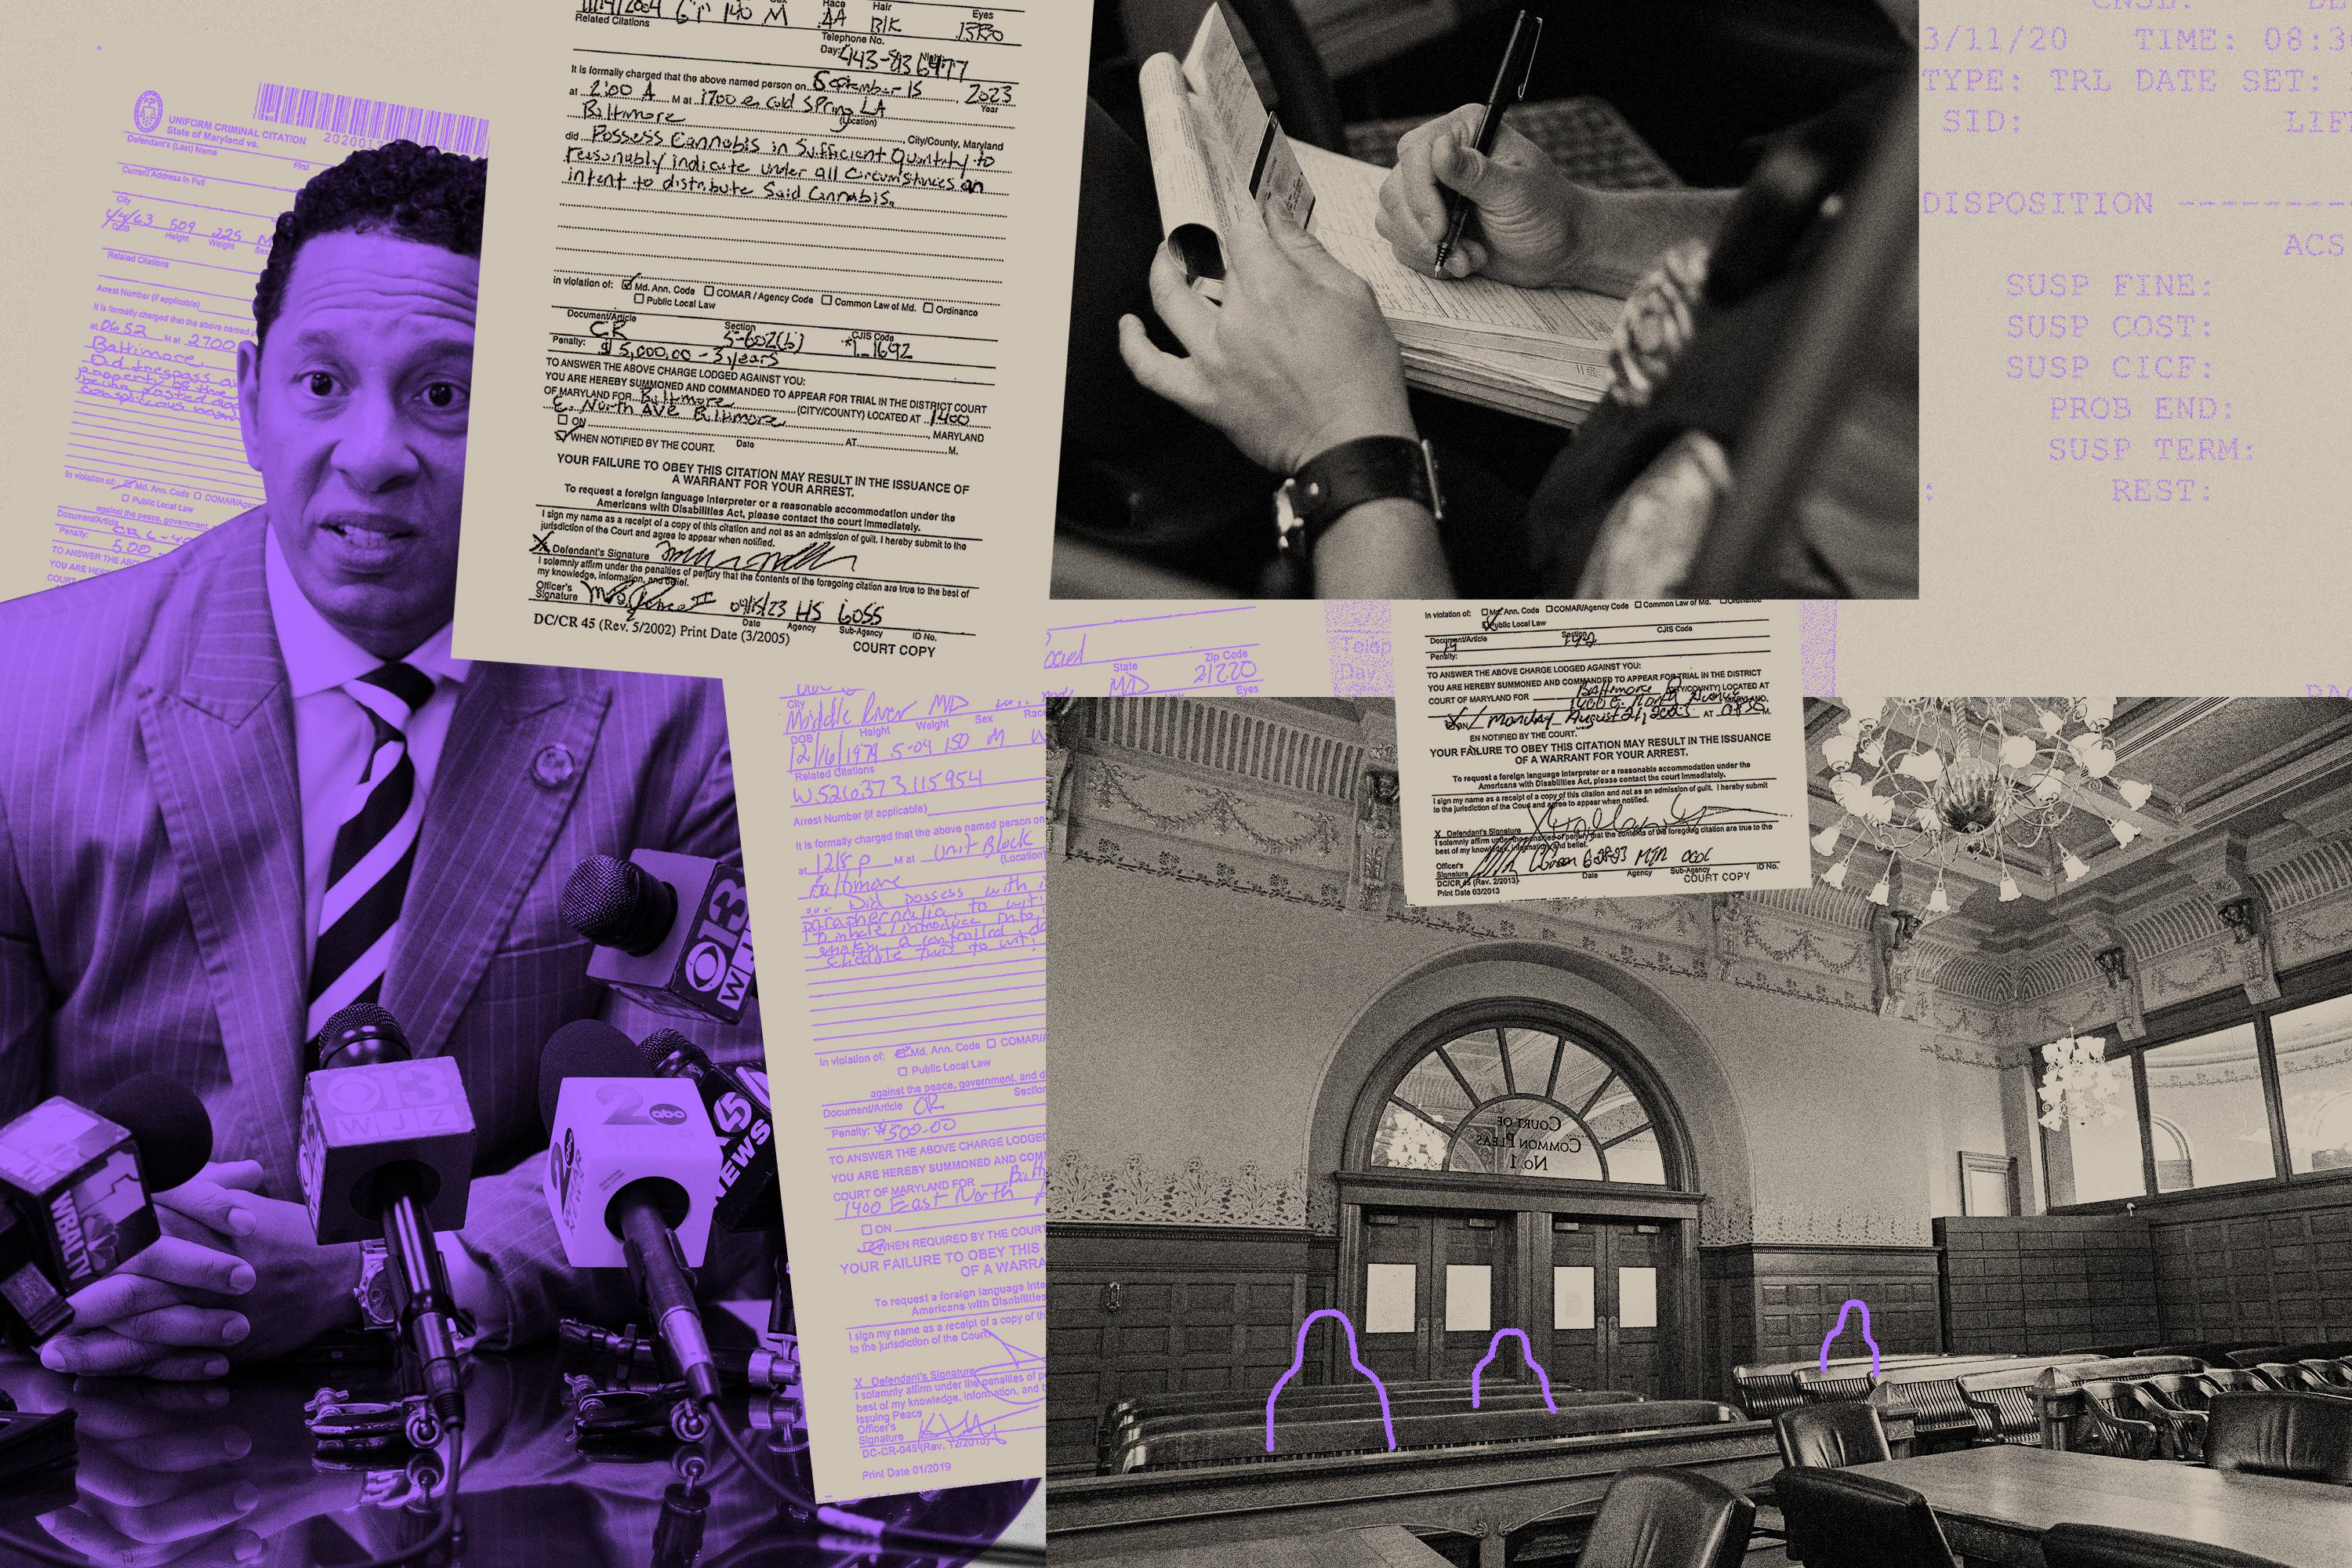 Illustration shows photo of Ivan Bates speaking into microphones on left, officer writing ticket on pad while seated in car, and an empty courtroom with police tickets layered over and between the photos.